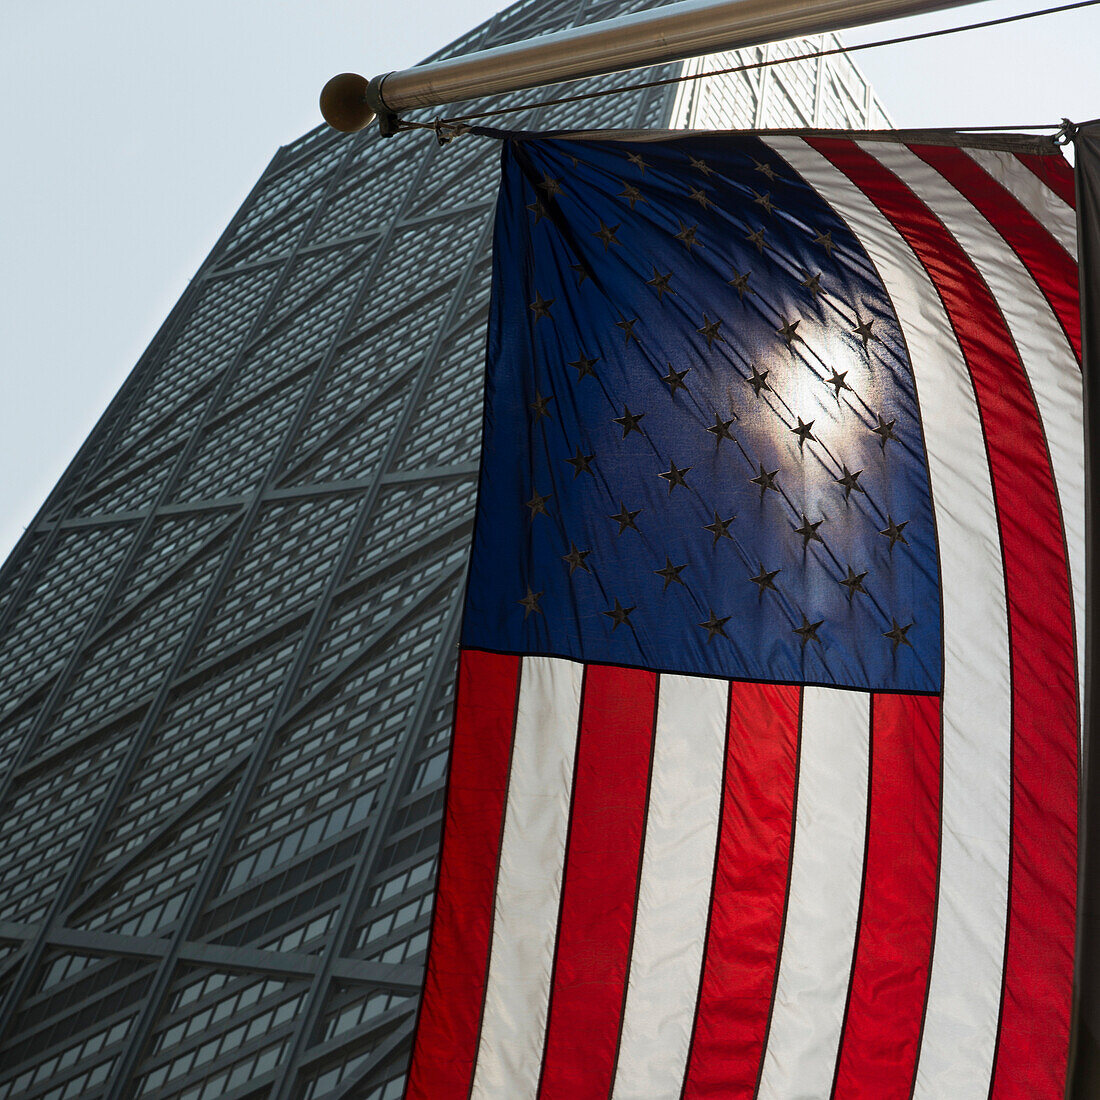 'American flag hanging with a building in the background;Chicago illinois united states of america'